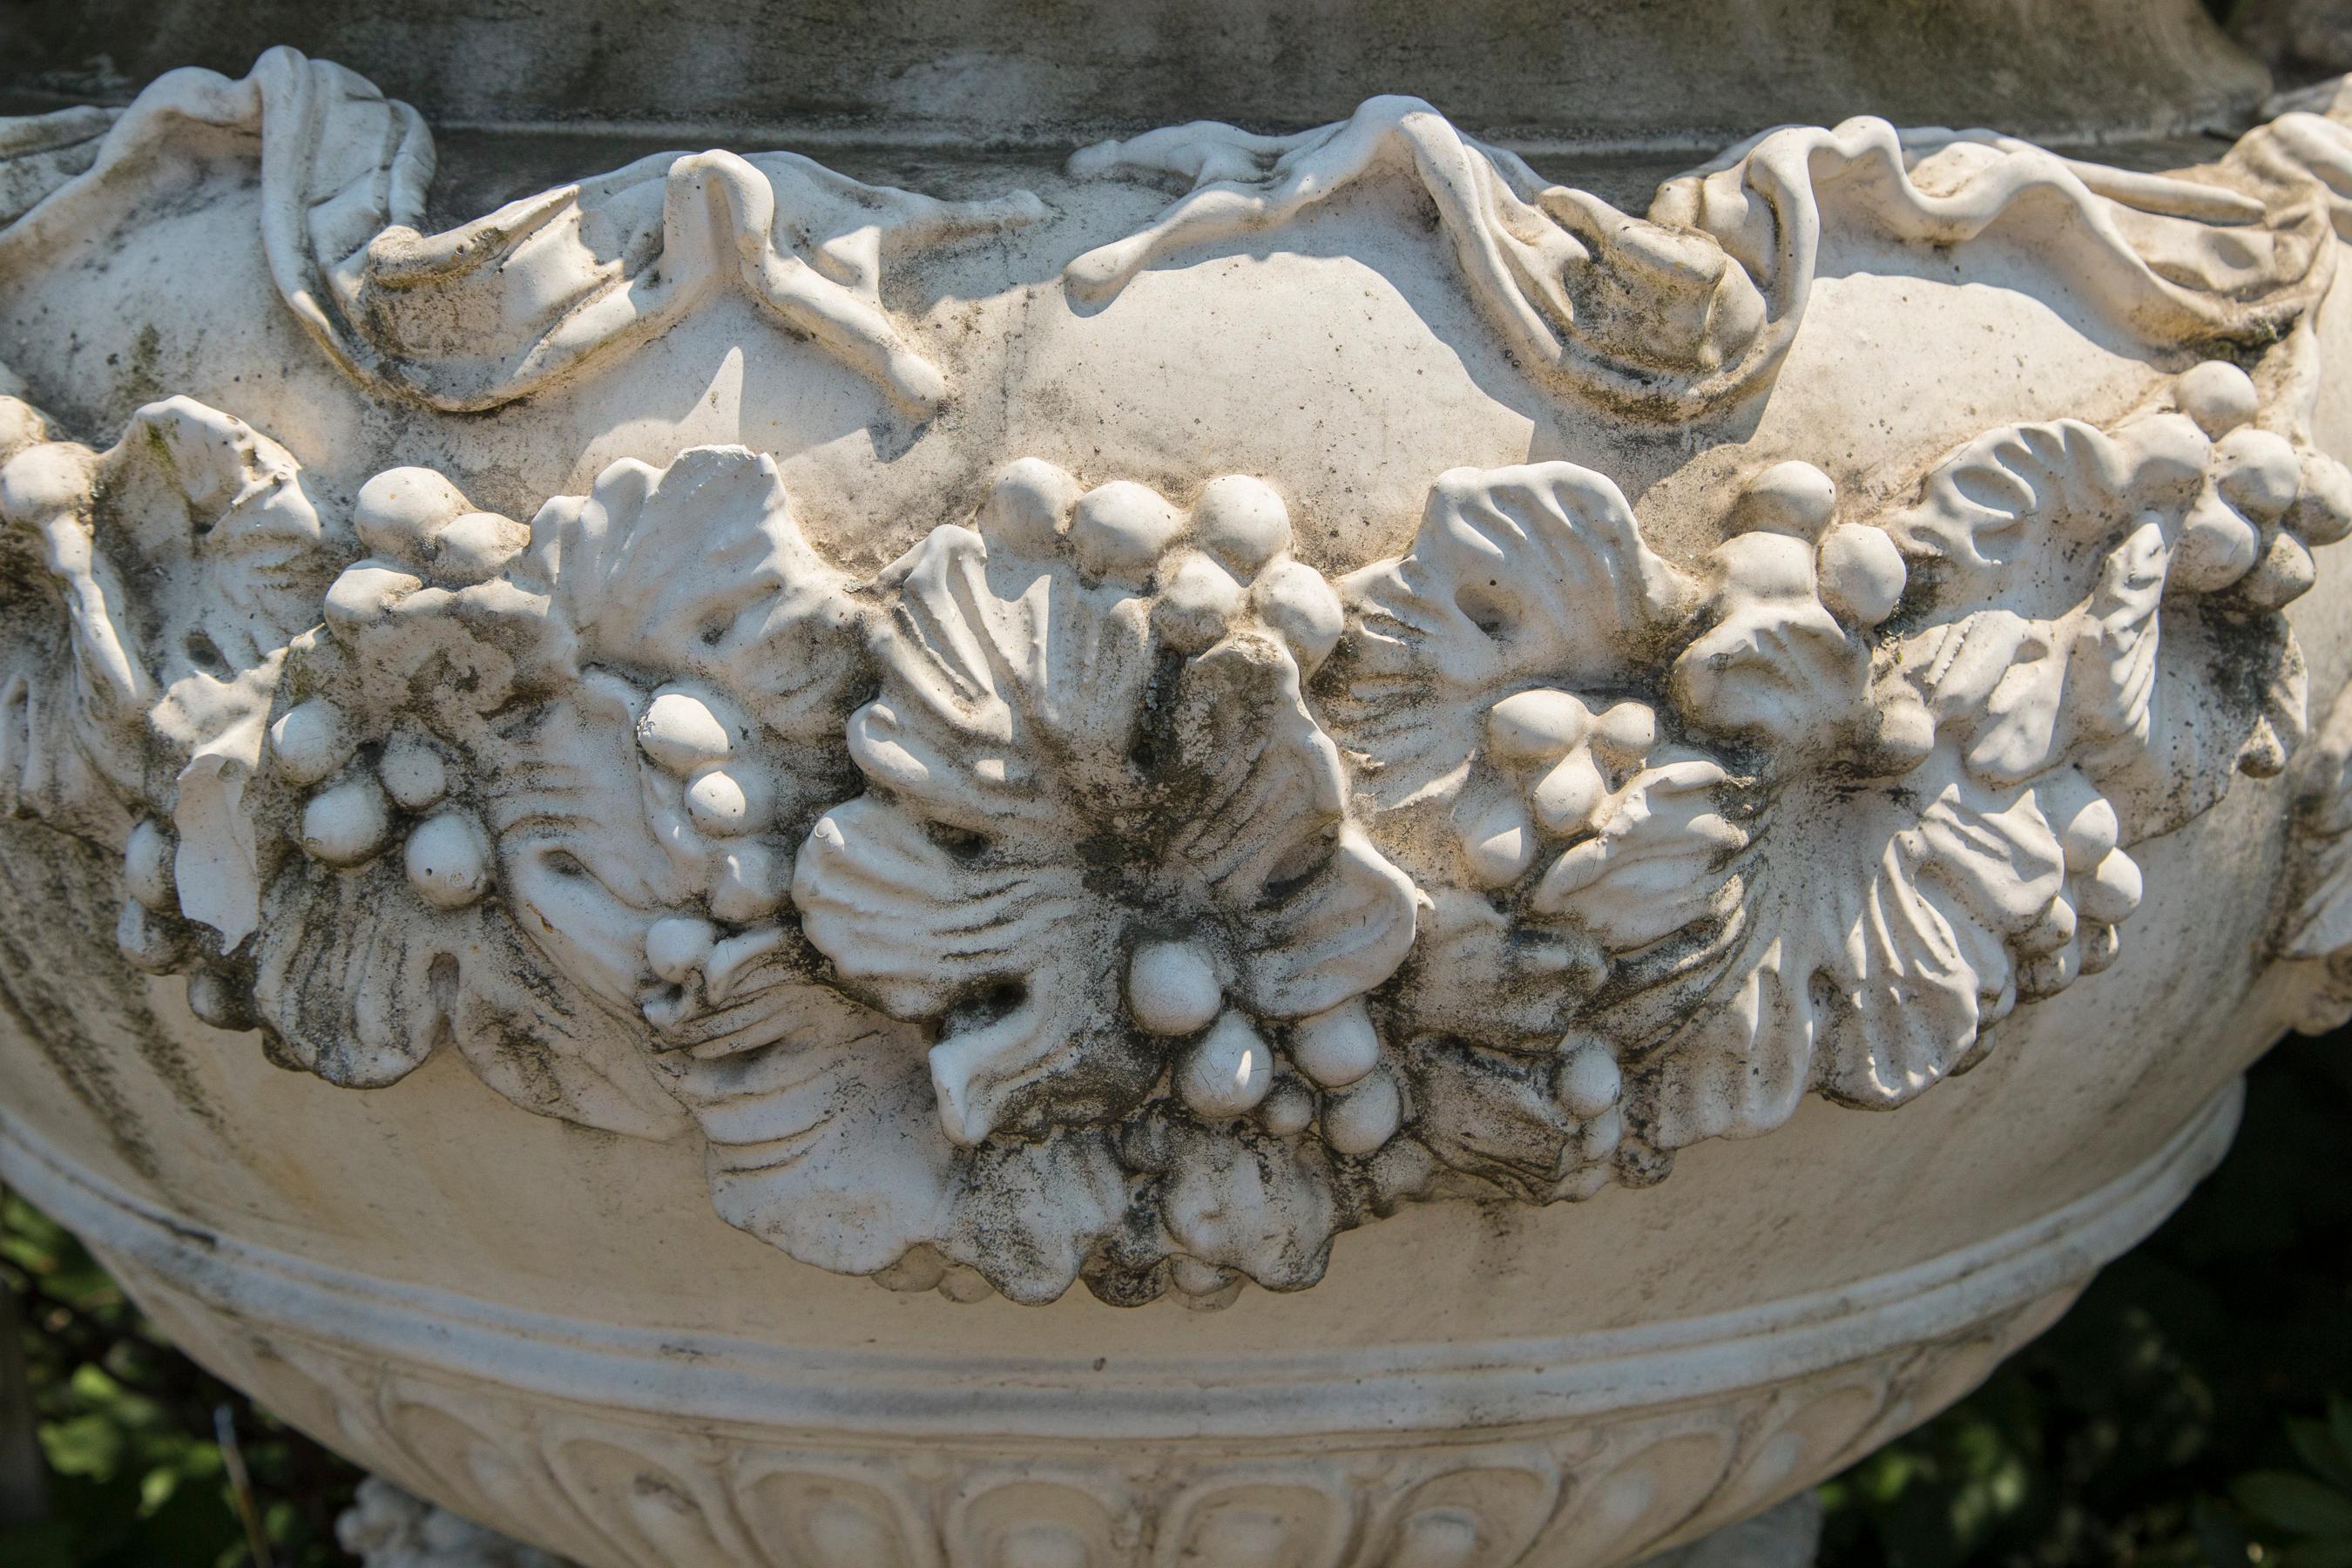 Cast from the 18th century French original, base with 4 seated putti. Large basin flanked by handles. The basin edged with gardrooning, the body covered with grape leaves and bunches of grapes. The base measures 20 x 20. and the bowl has an opening